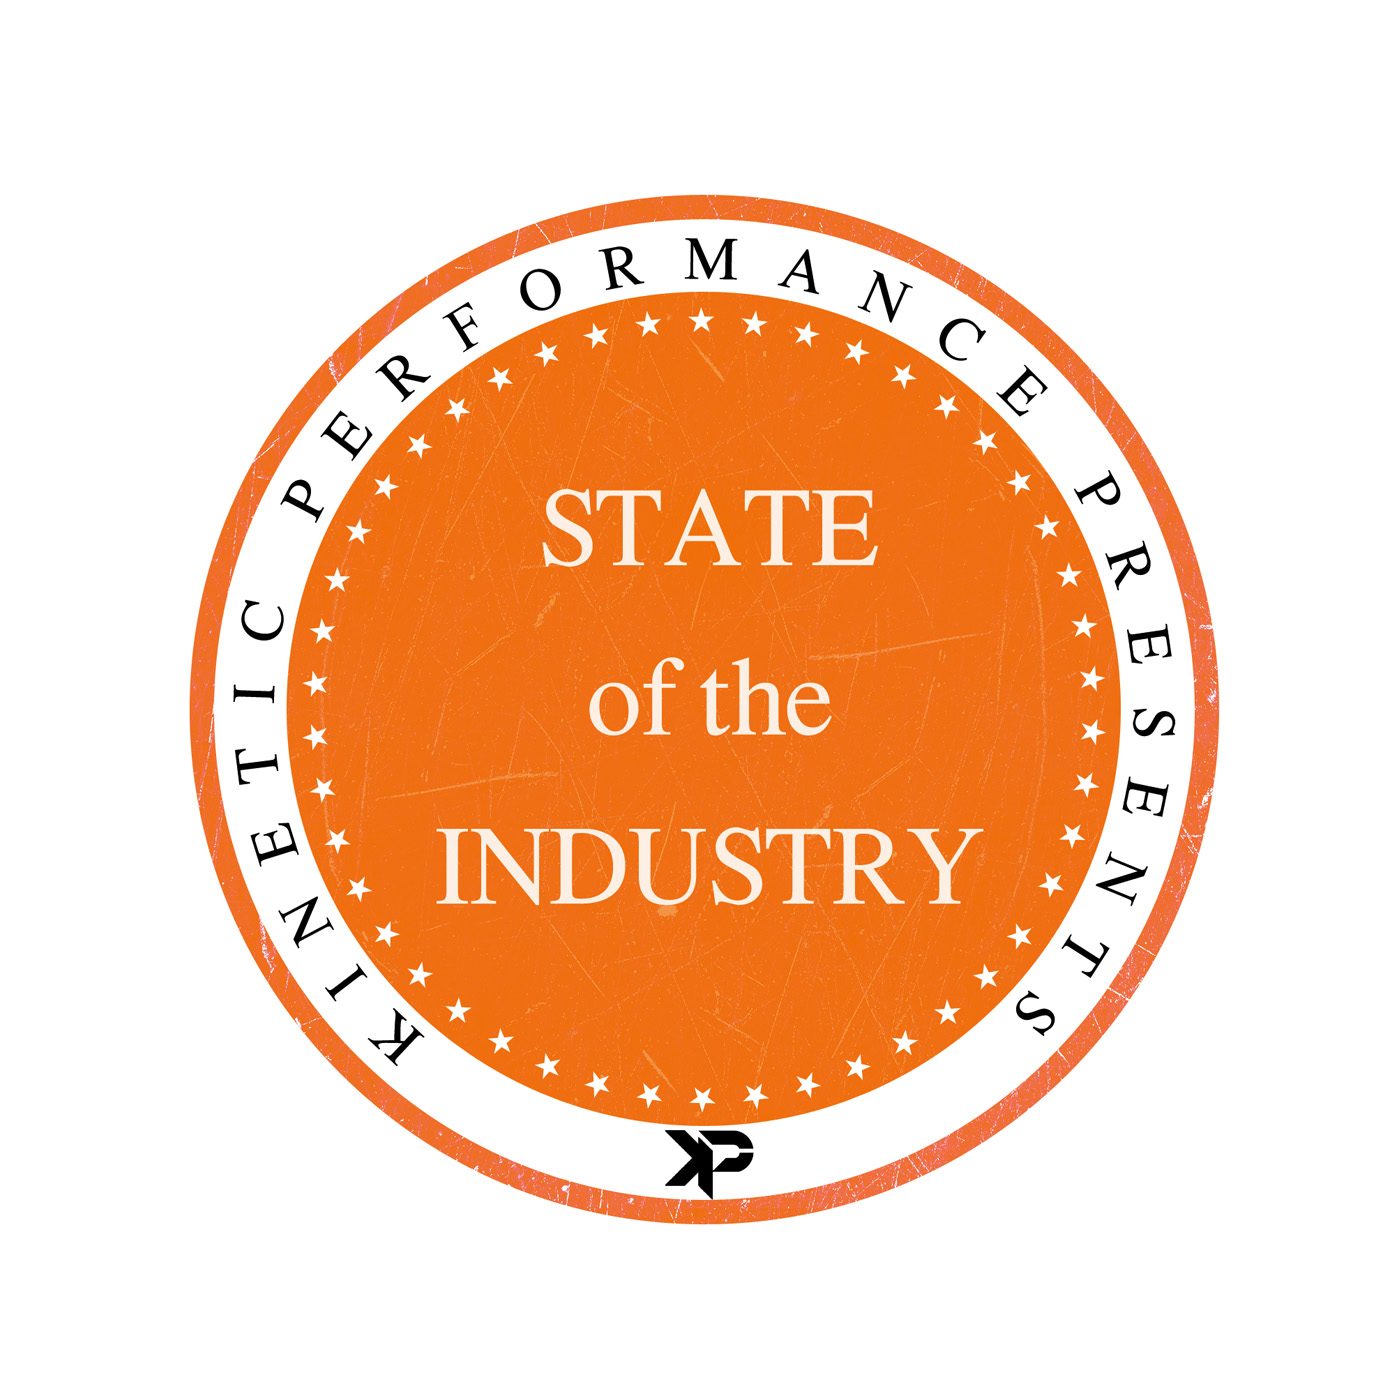 State of the Industry Podcast